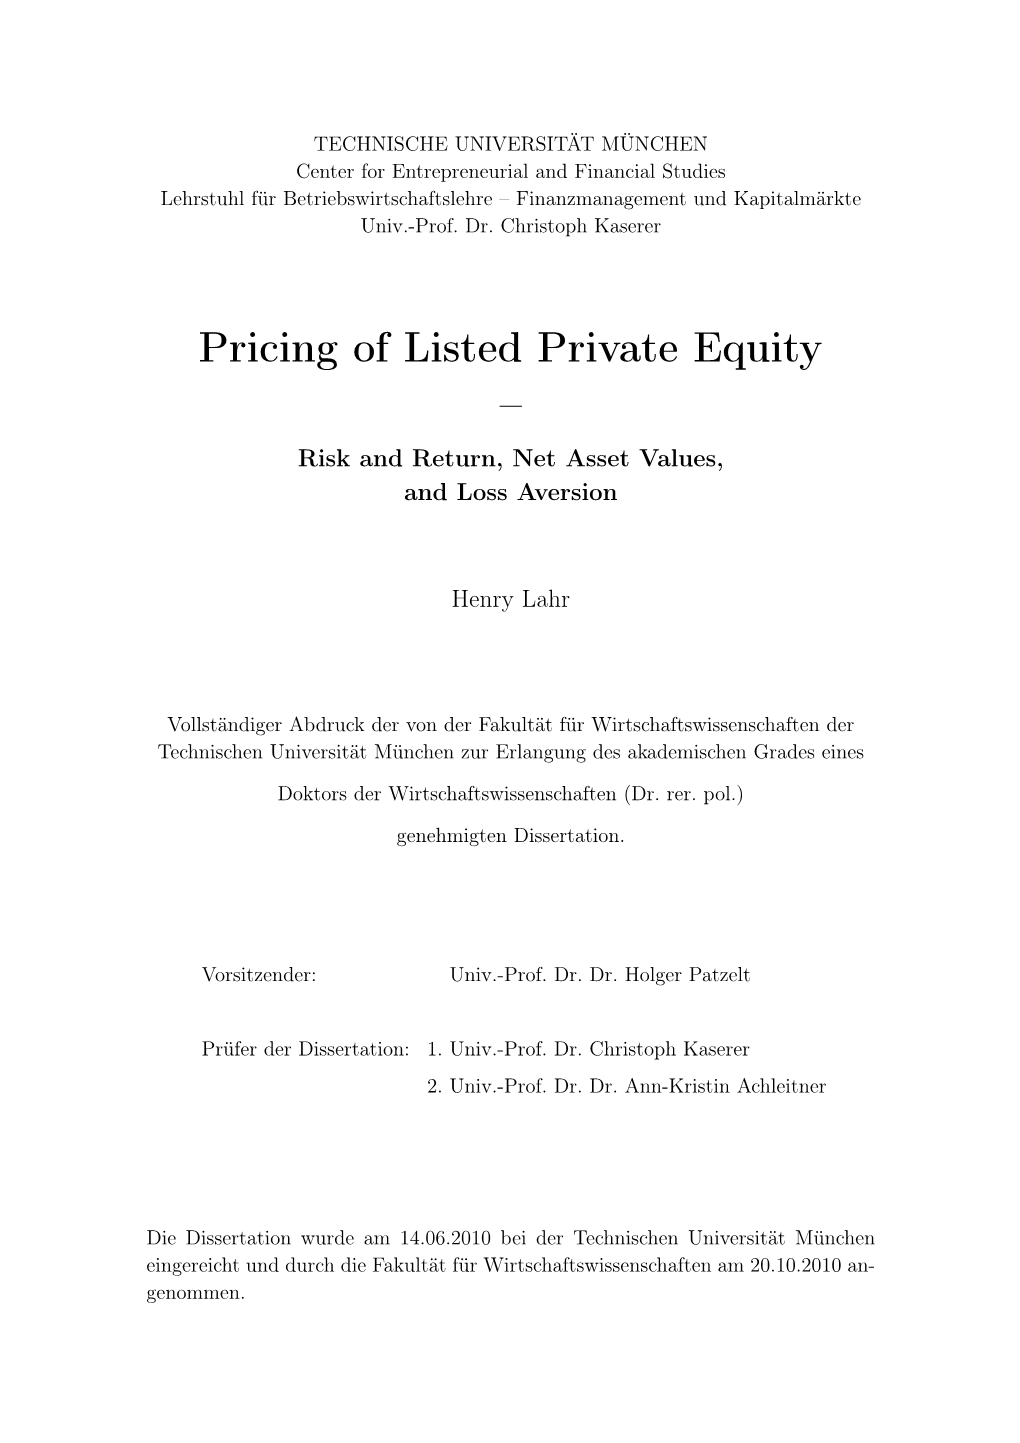 Pricing of Listed Private Equity – Risk and Return, Net Asset Values, and Loss Aversion